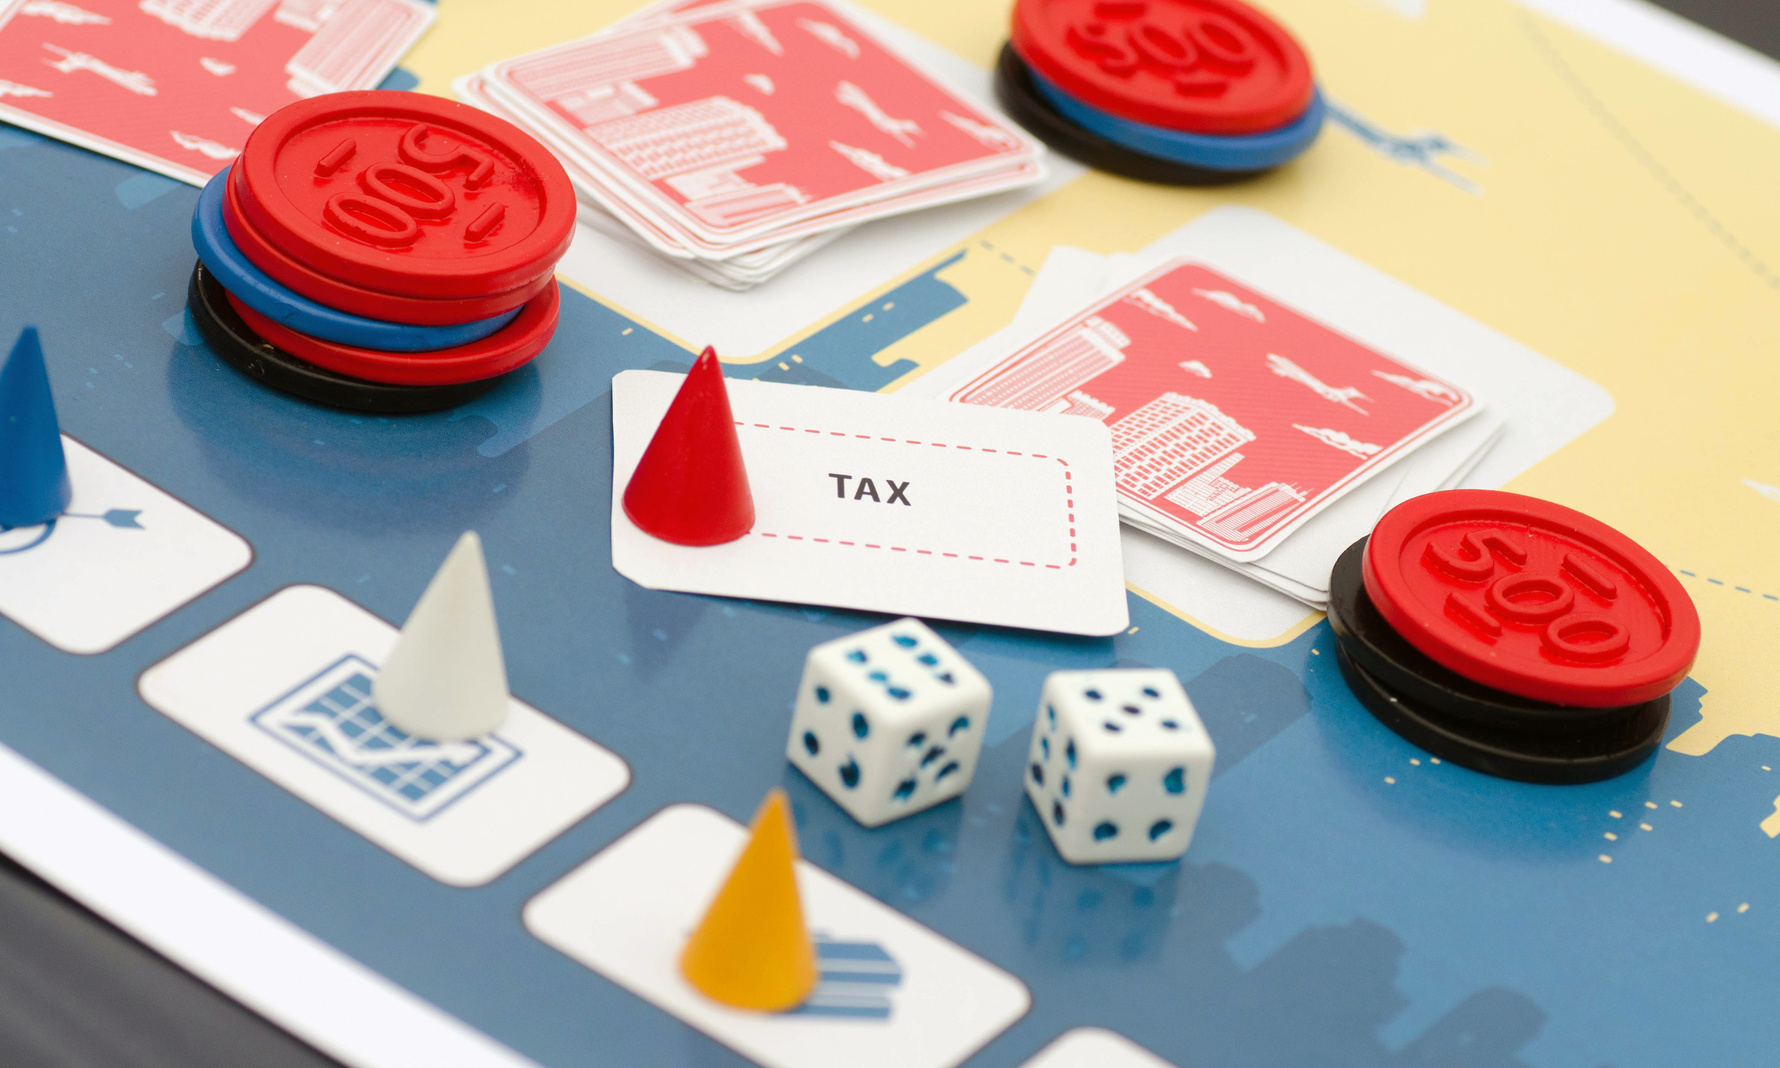 Board game prototype with cones, chips, dice, and card that says tax